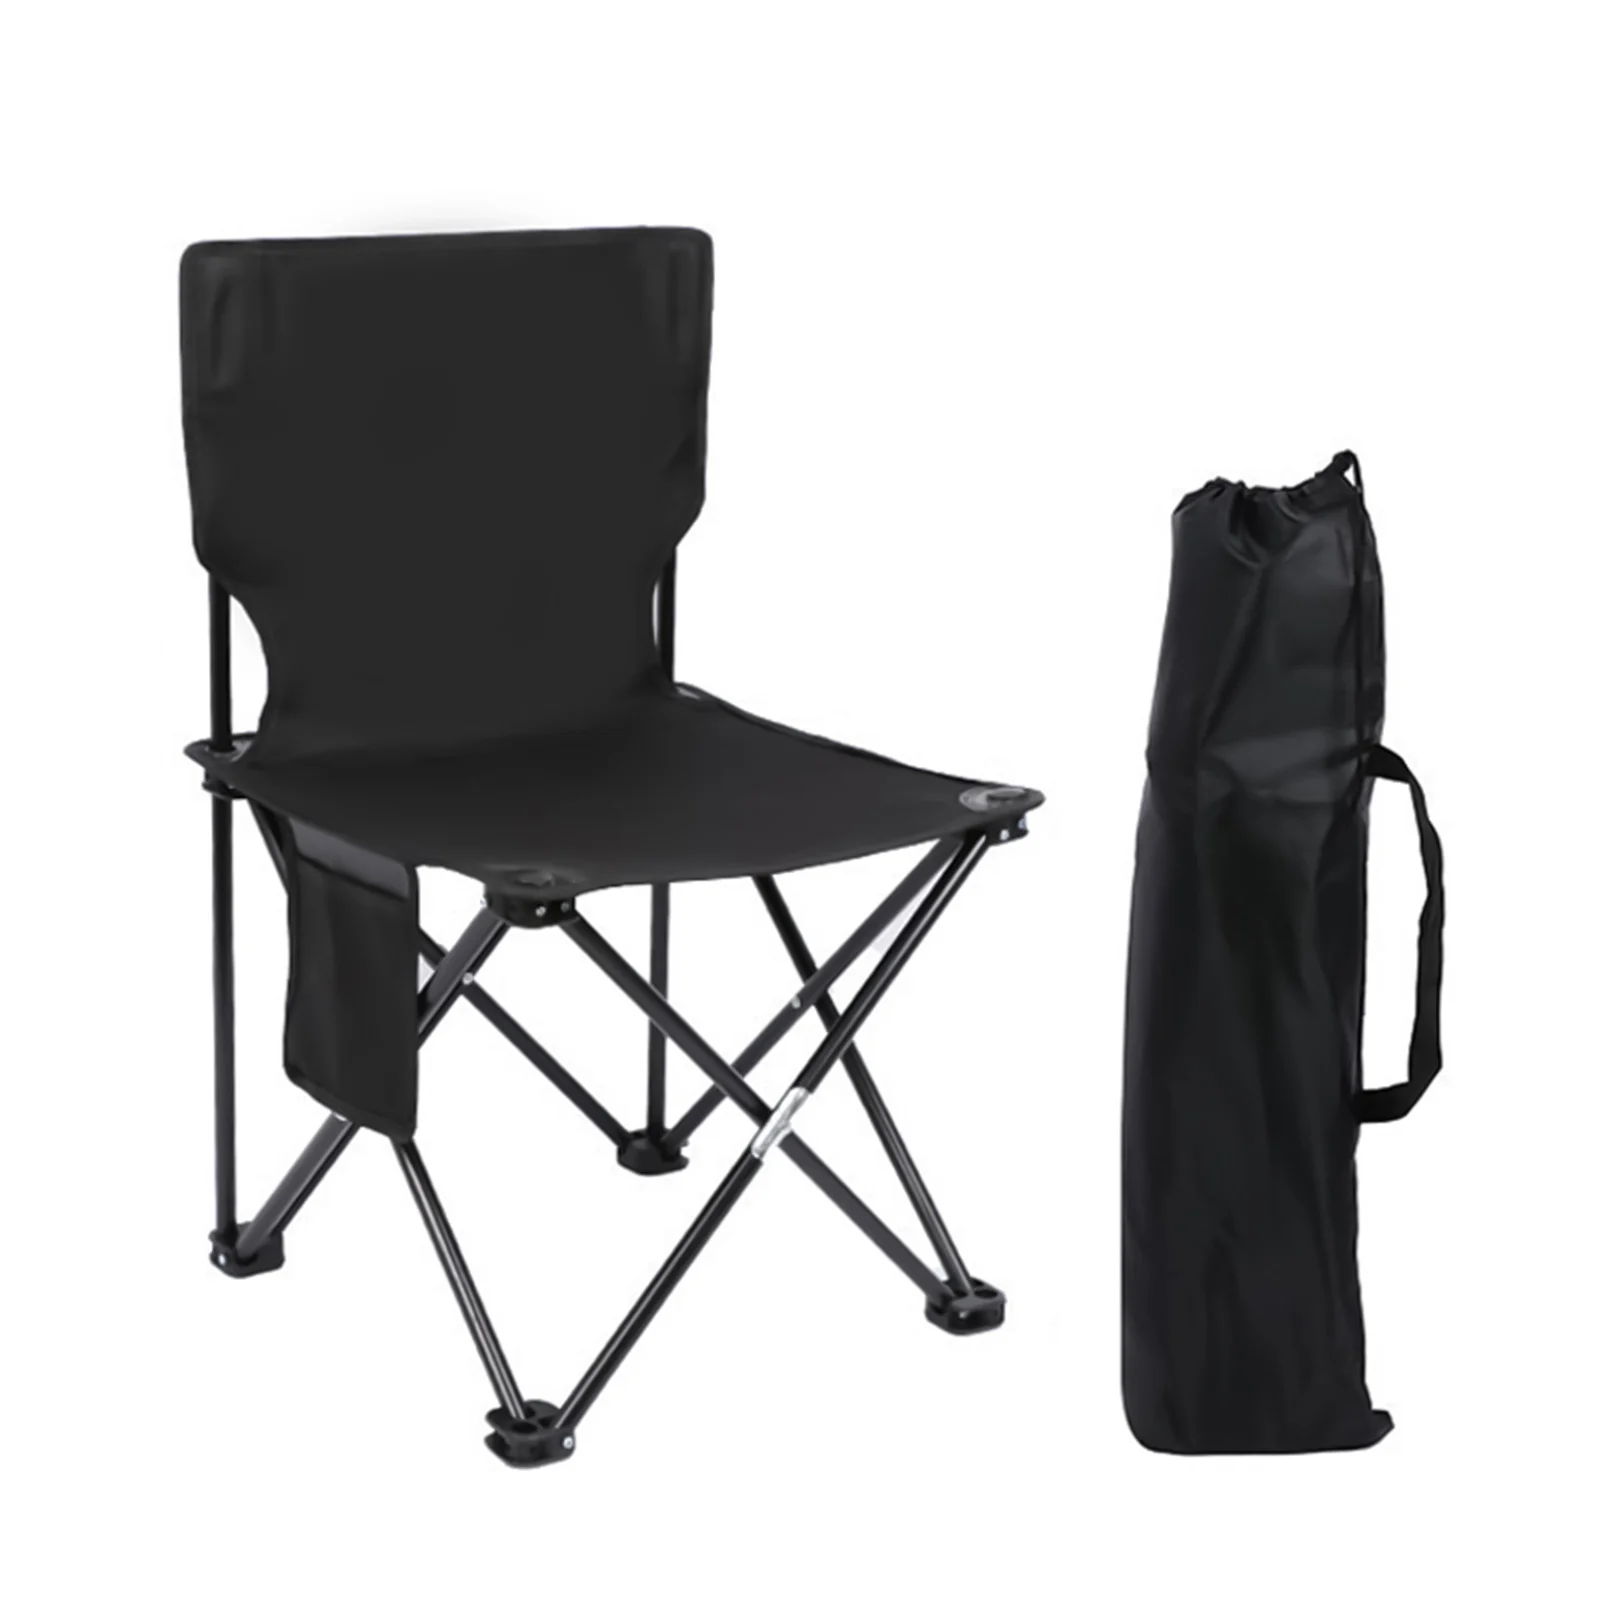 

Foldable Camping Chairs with Strong Bearing Capacity and Hi-density Nylon Oxford Suitable for Festival Backpacking